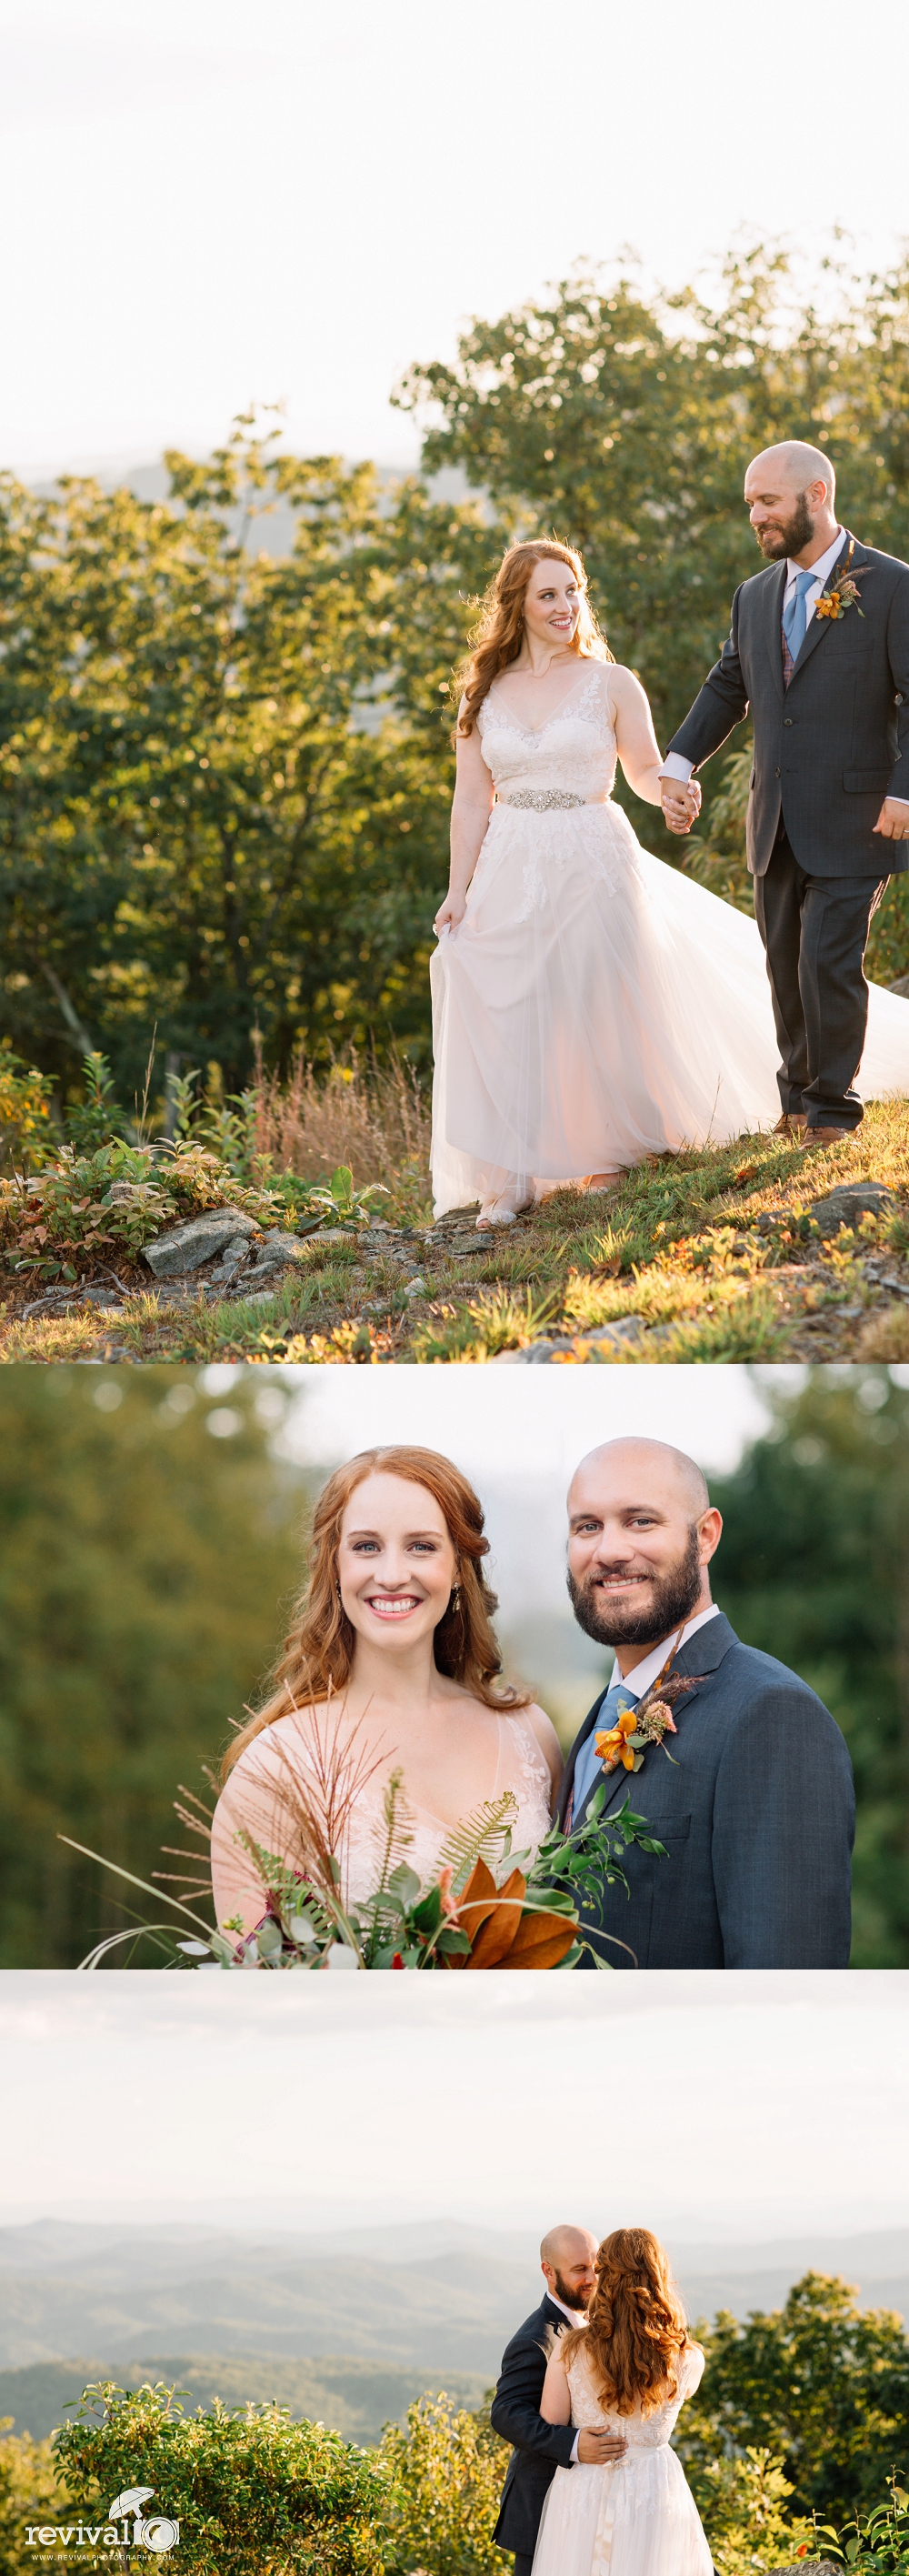 Brittany + Brian's Blowing Rock Destination Wedding at Blue Ridge Mountain Club NC Wedding Photographers Revival Photography Husband and Wife Wedding Photographers www.revivalphotography.com